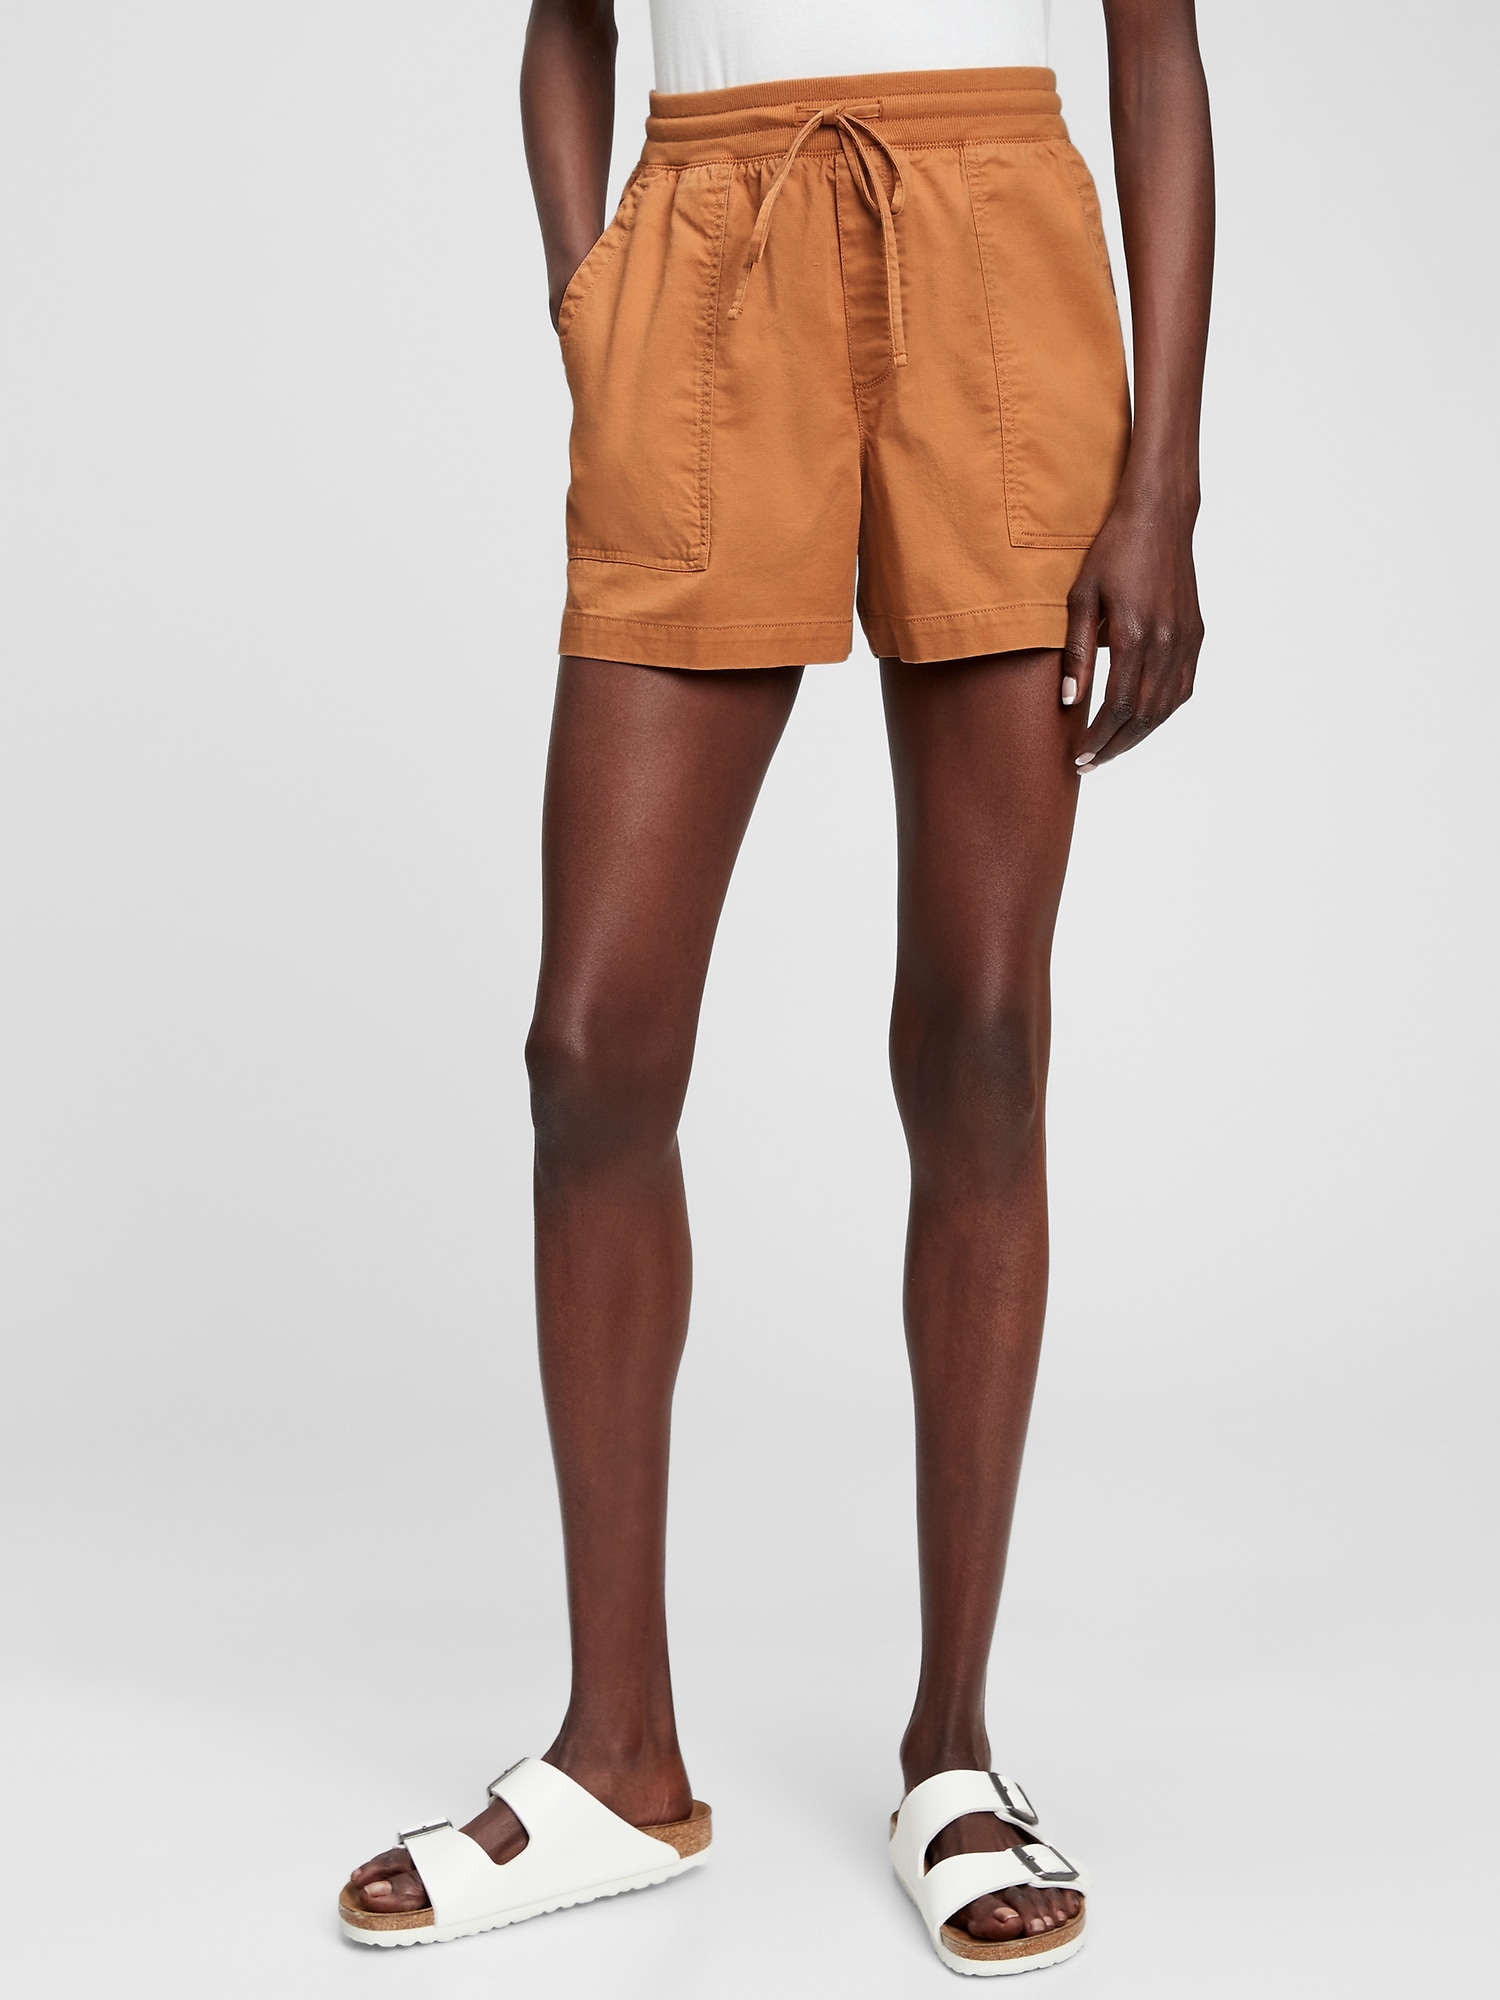 Pull-On Utility Shorts with Washwell | Gap Factory